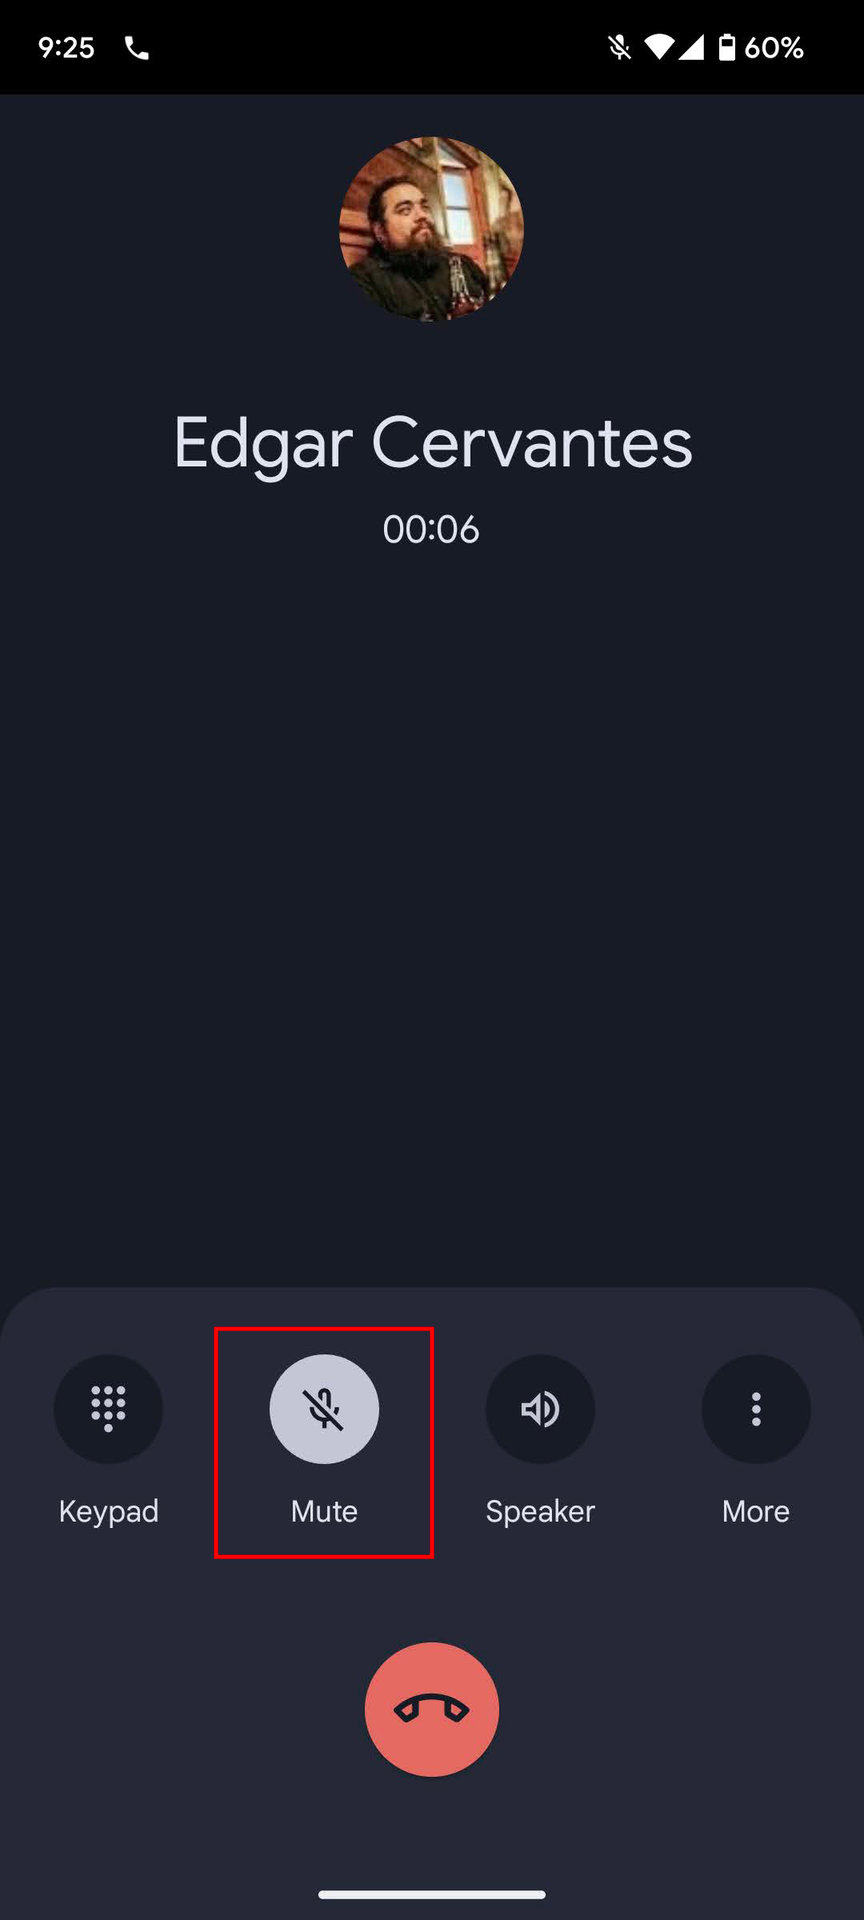 How to mute or unmute your microphone during a call (2)